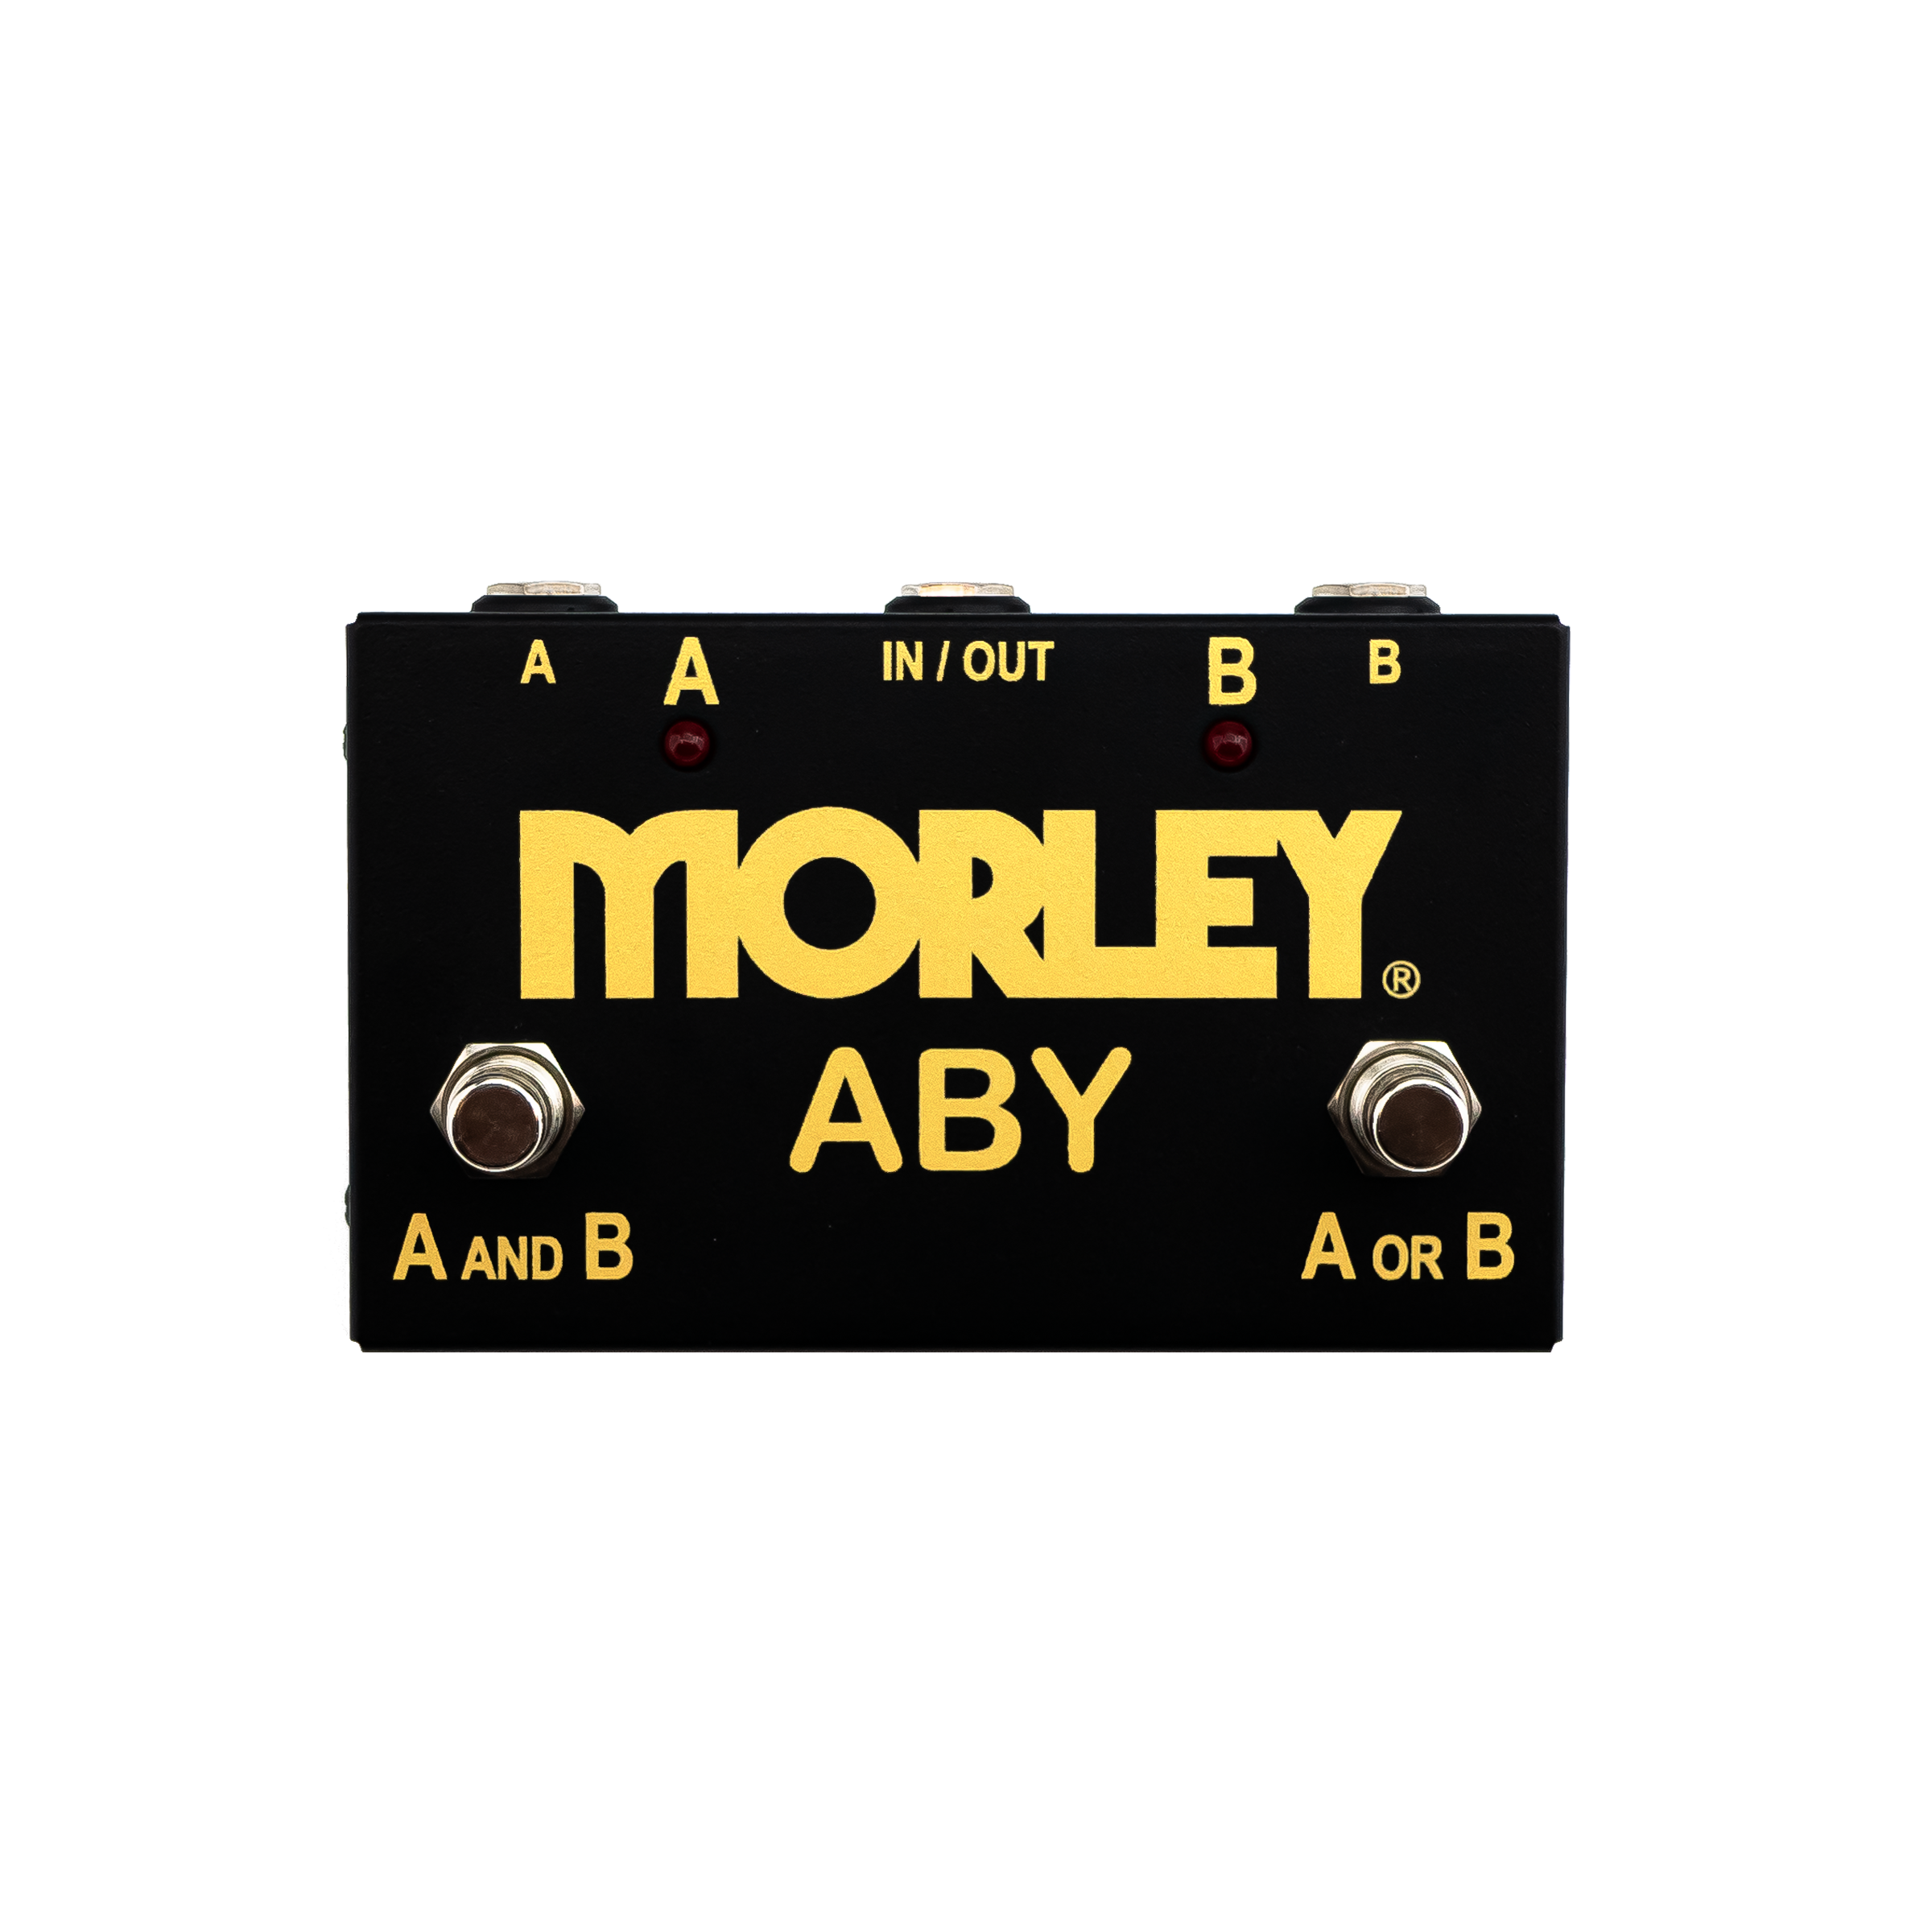 Morley ABY Gold Series Selector/Combiner